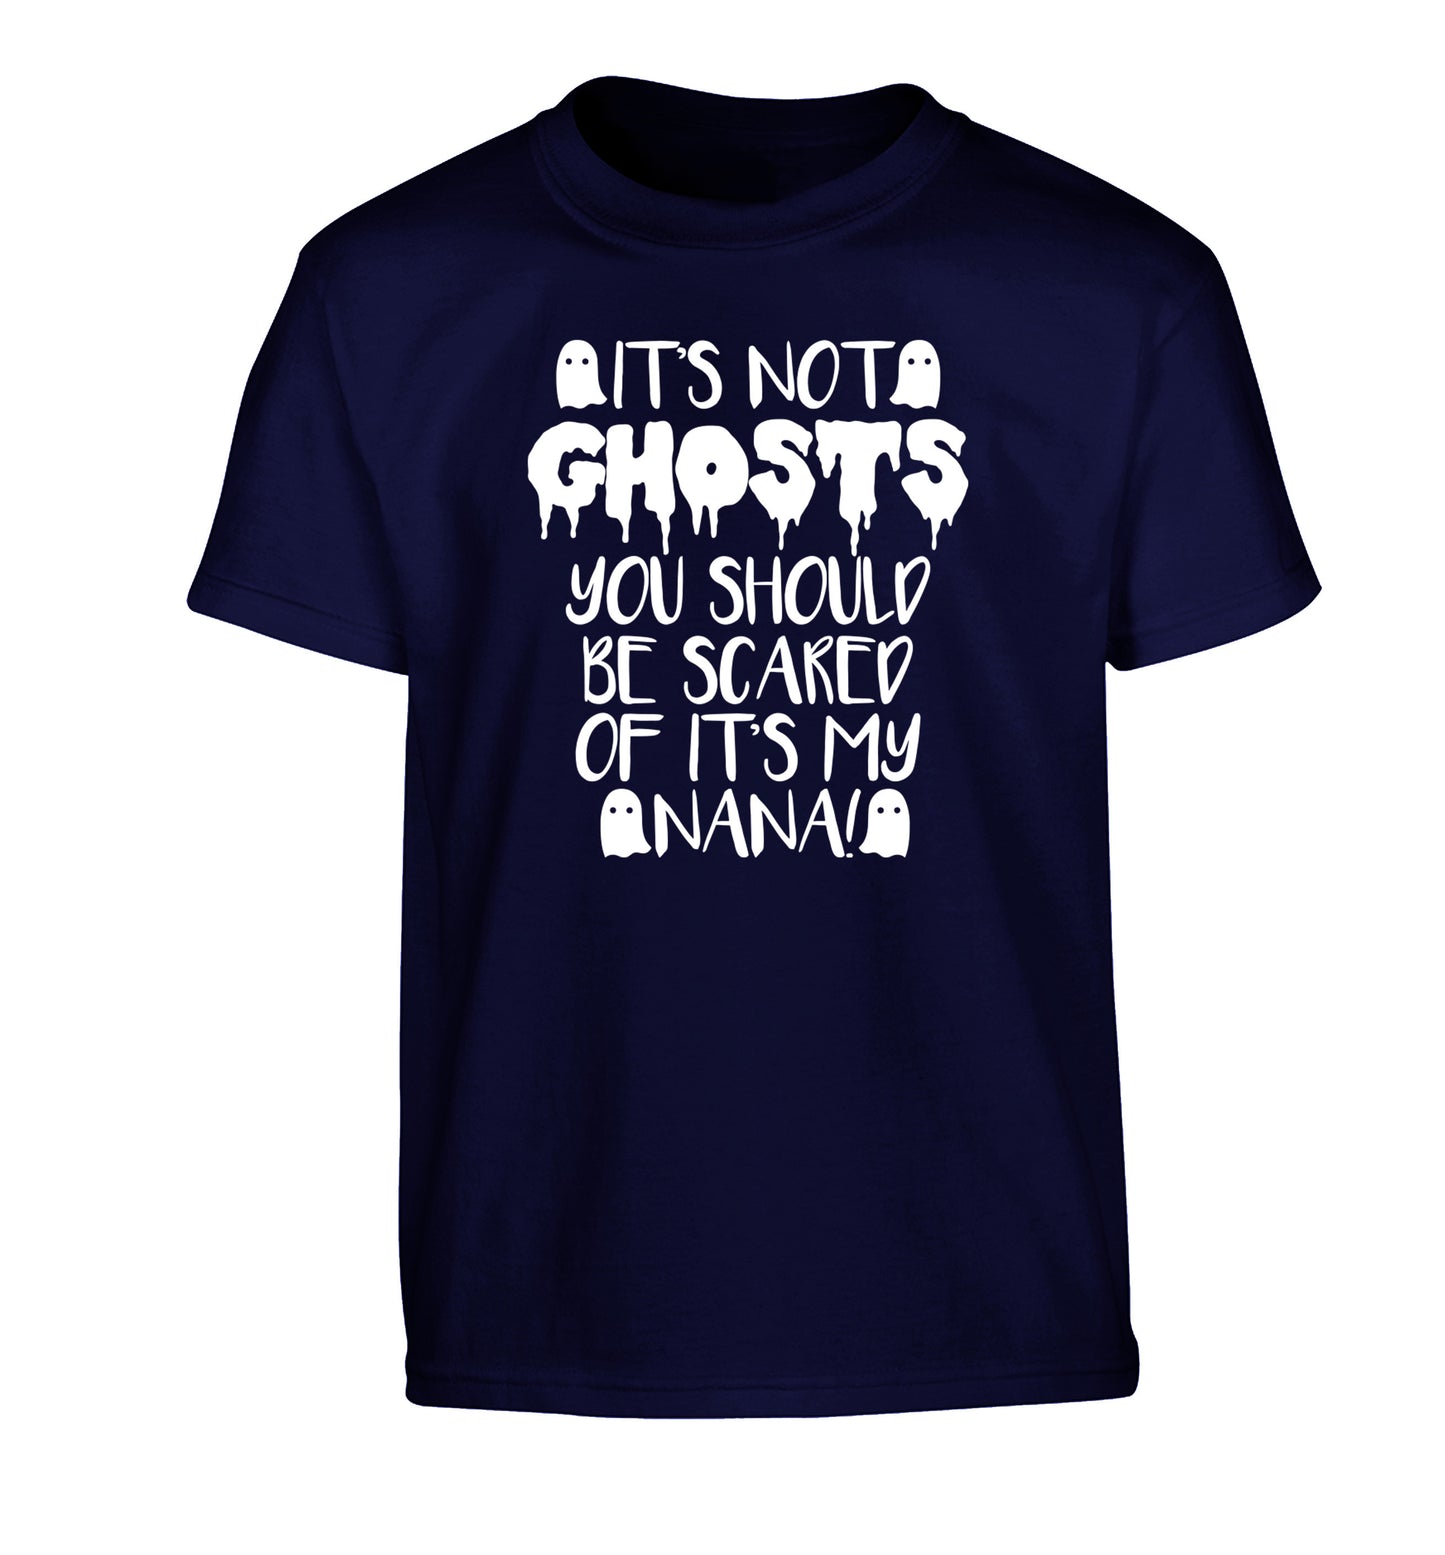 It's not ghosts you should be scared of it's my nana! Children's navy Tshirt 12-14 Years